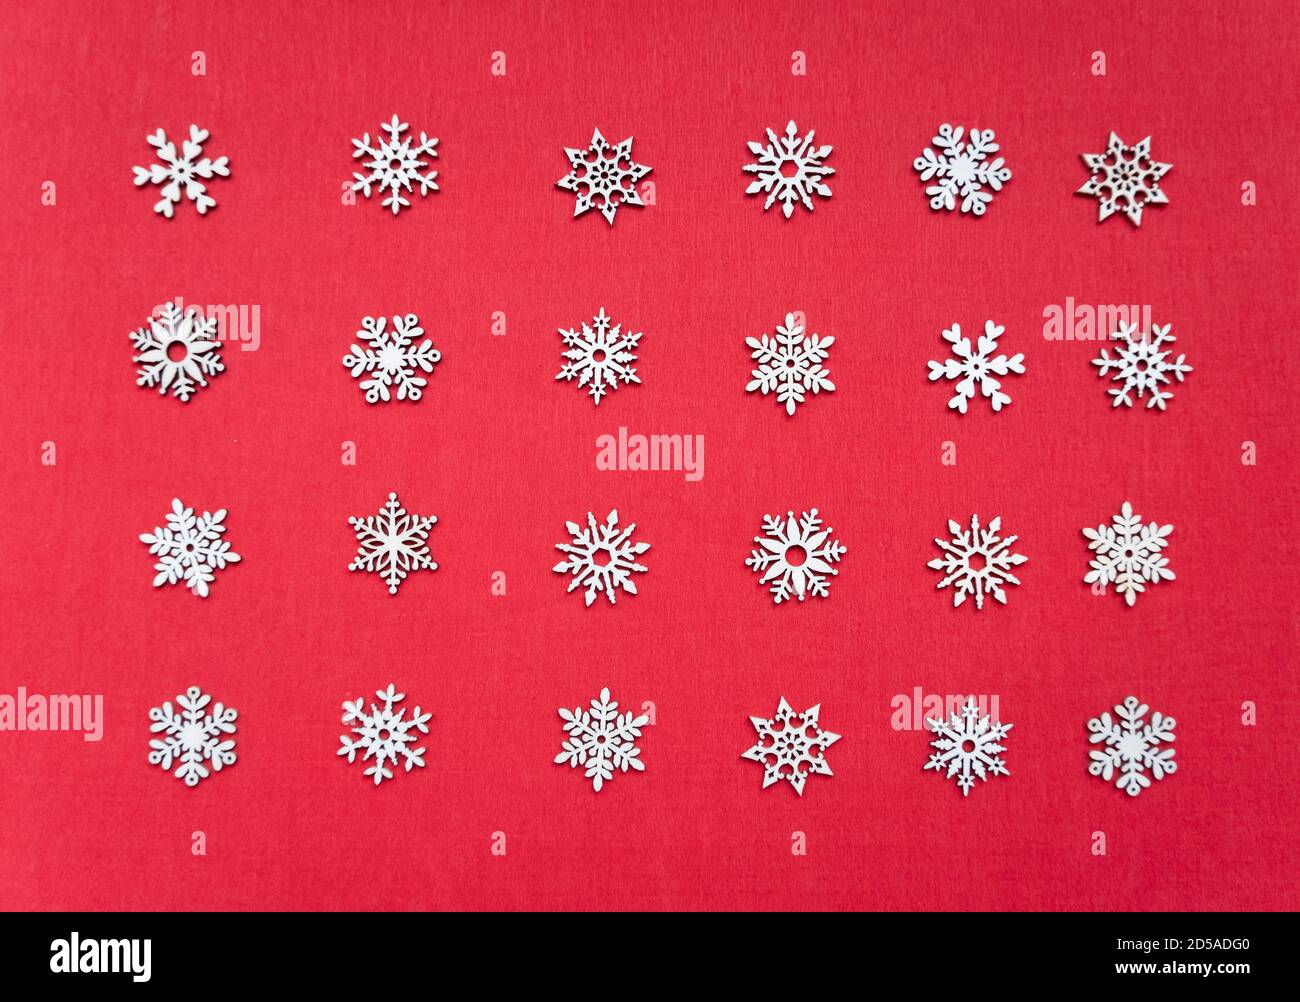 Decorative white Christmas snowflakes non-repeat ornament in geometrical order on the red textured background, simple abstract texture Stock Photo